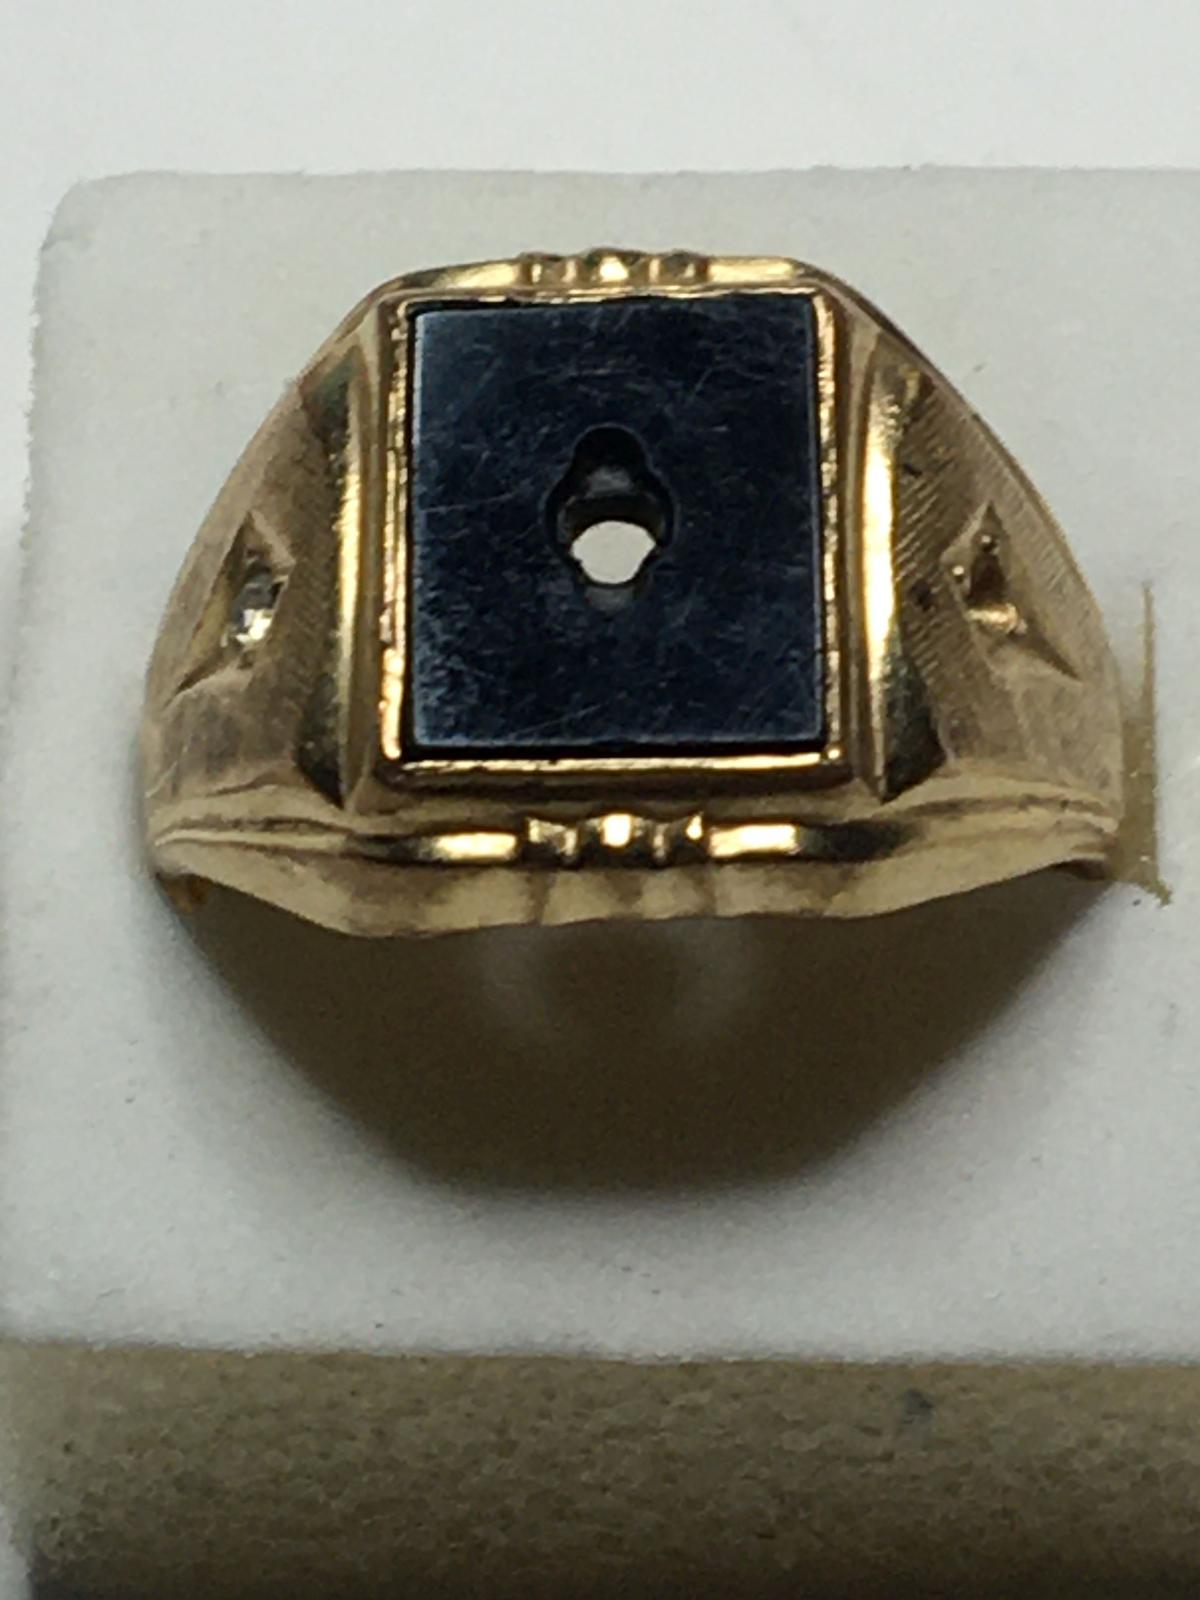 10 Kt Gf Gold Ring With Black Onyx Size 12.5